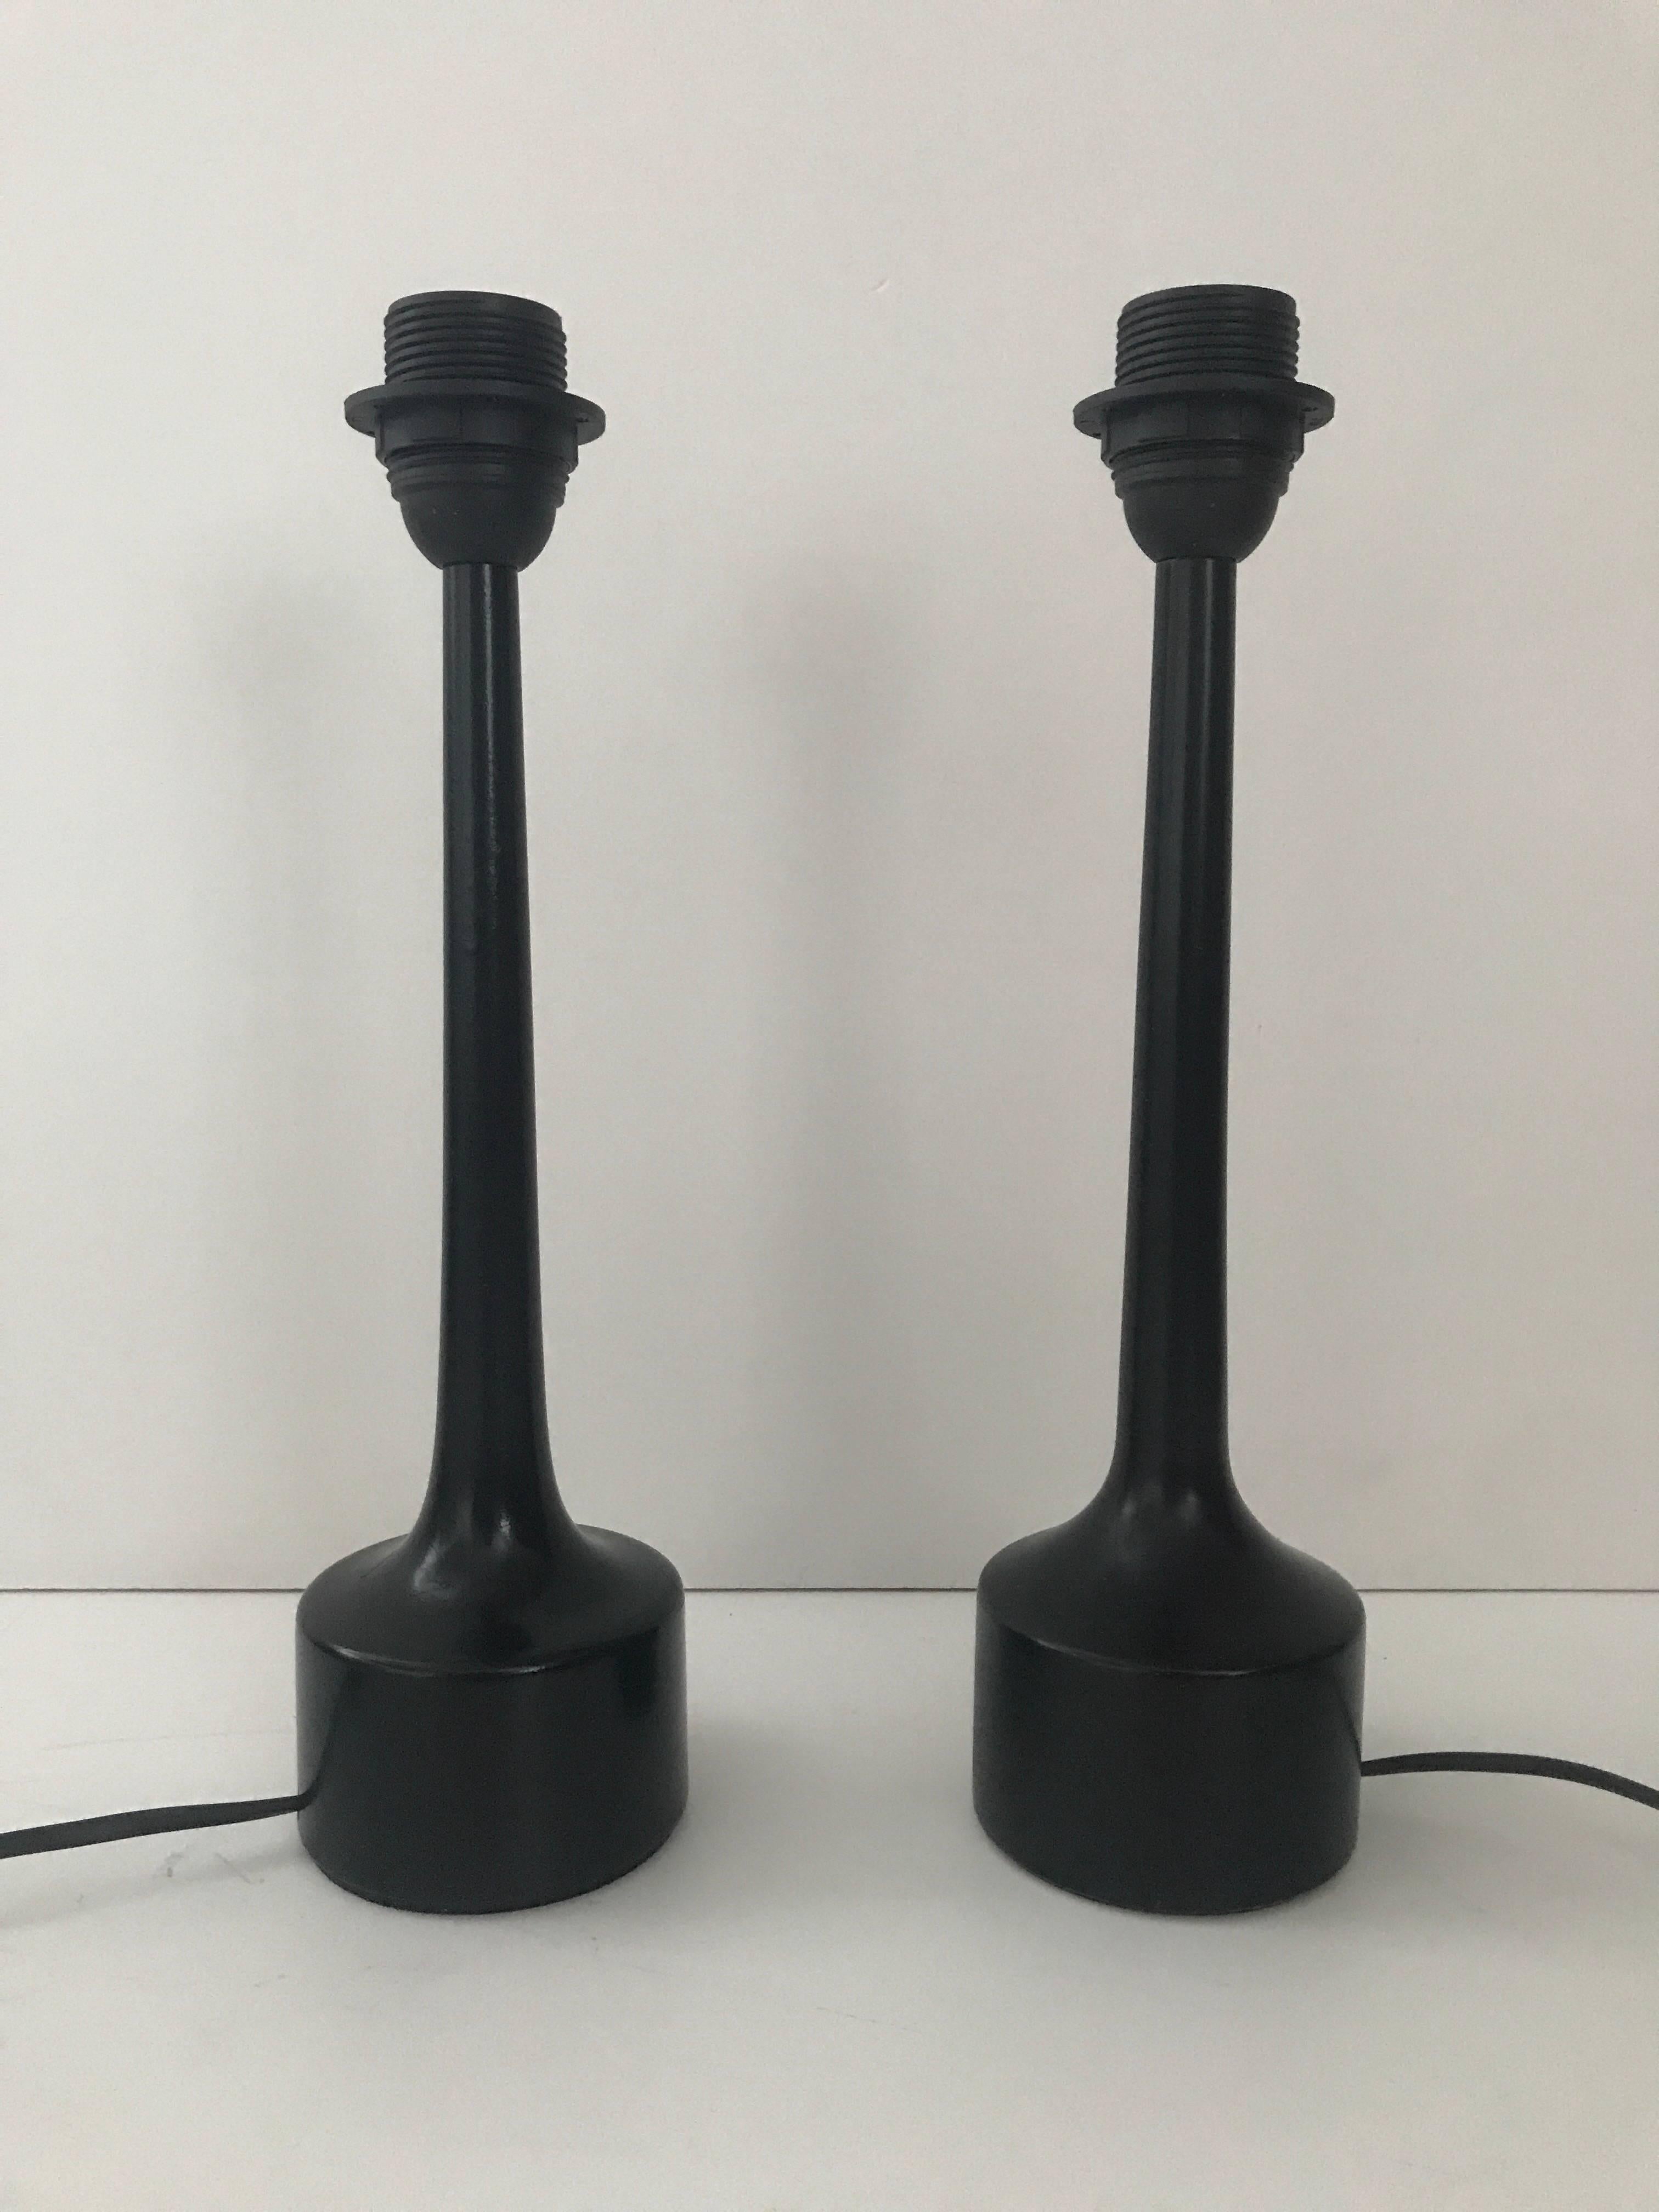 Pair of Swedish Hans-Agne Jakobsson Black Lacquered Wooden Table Lamps, 1955 For Sale 2